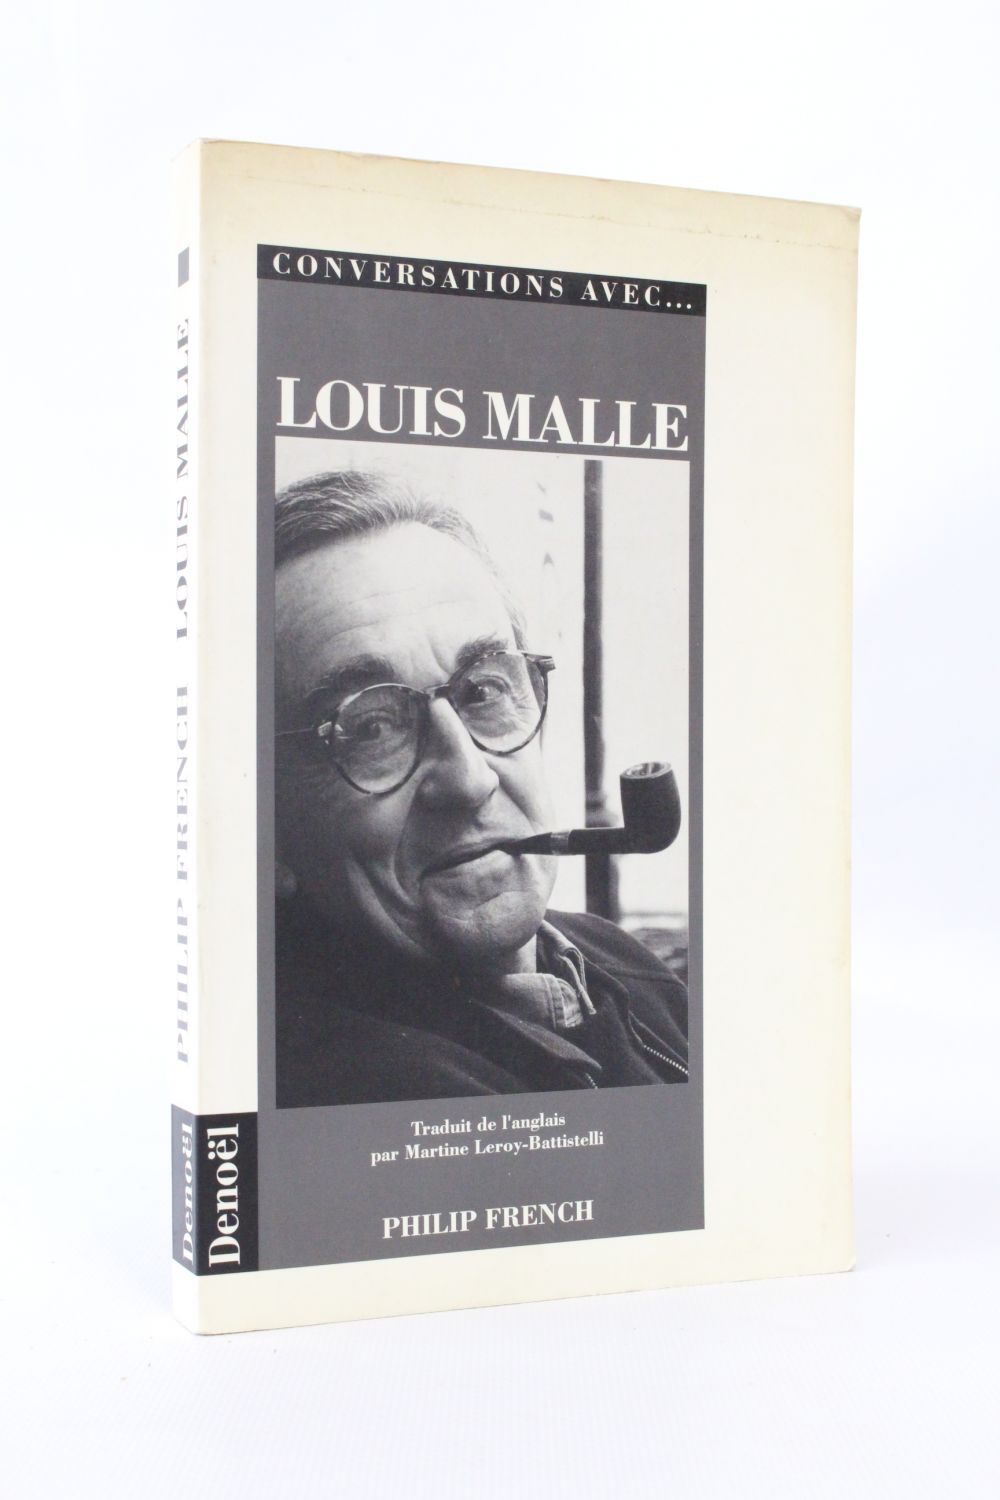 MALLE ON MALLE Edited by Philip French SIGNED BY BOTH